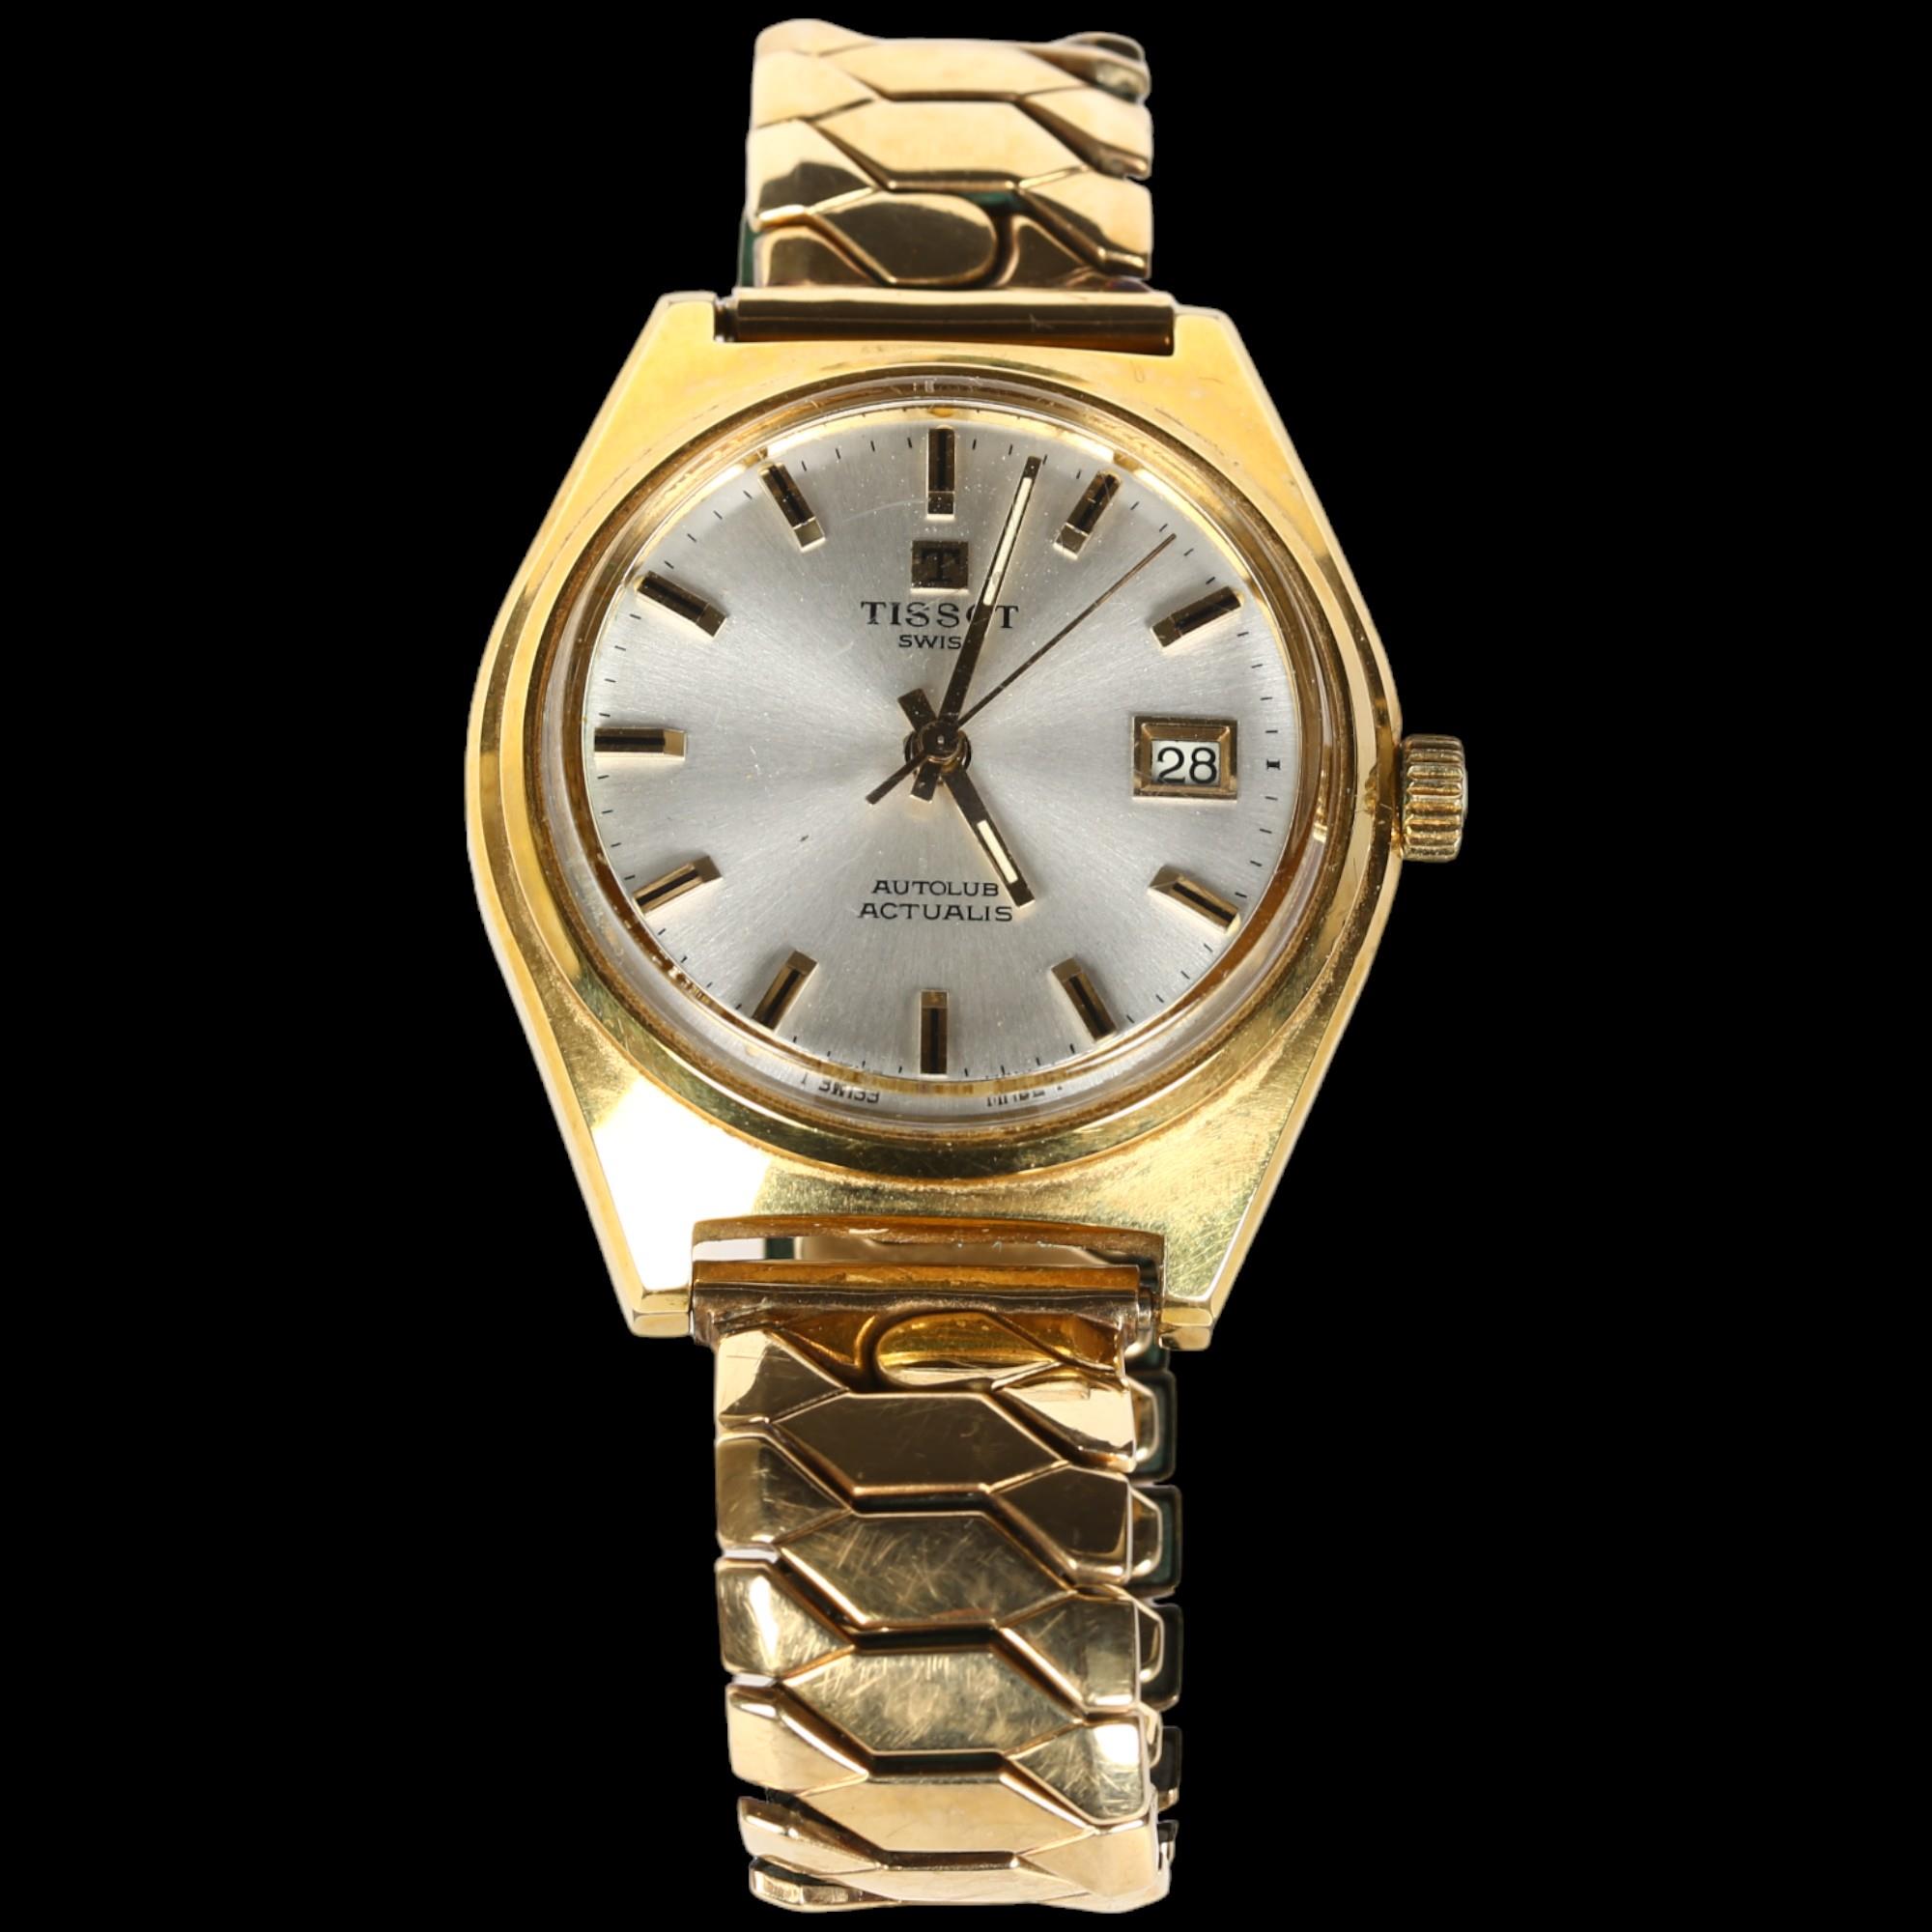 TISSOT - a gent's gold plated Autolub wristwatch with date aperture, and elasticated strap,